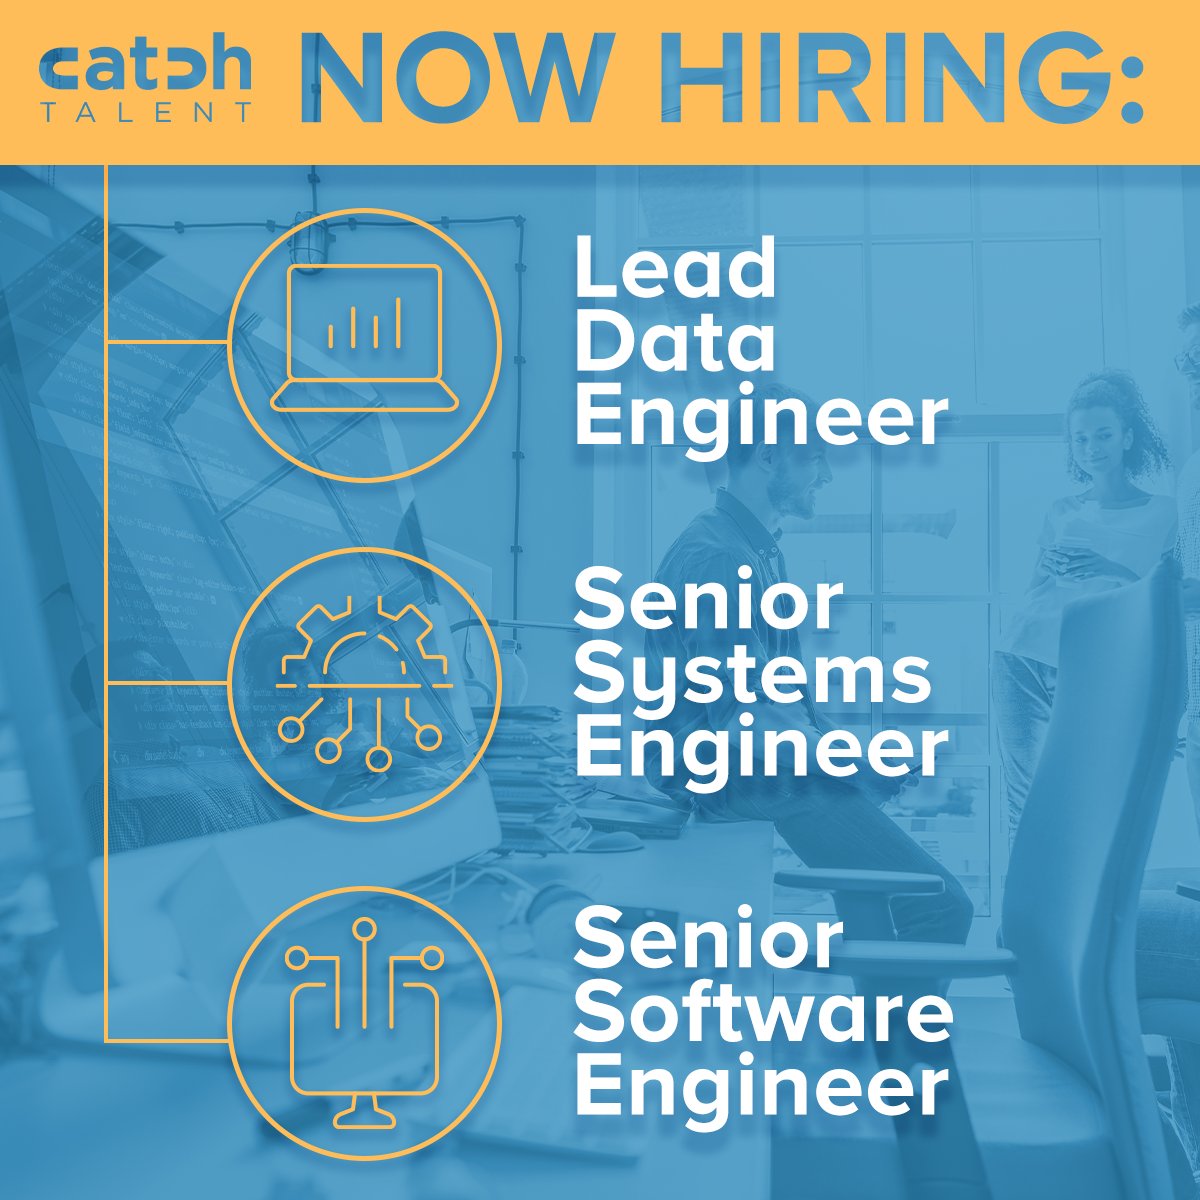 We've got an incredible array of exciting opportunities waiting for you - Ensure that you land your dream job by connecting with one of our talented technical recruiters! #technicalrecruiter #hiring #techjobs #softwareengineer #softwareengineeringjobs #datajobs #hiringengineers